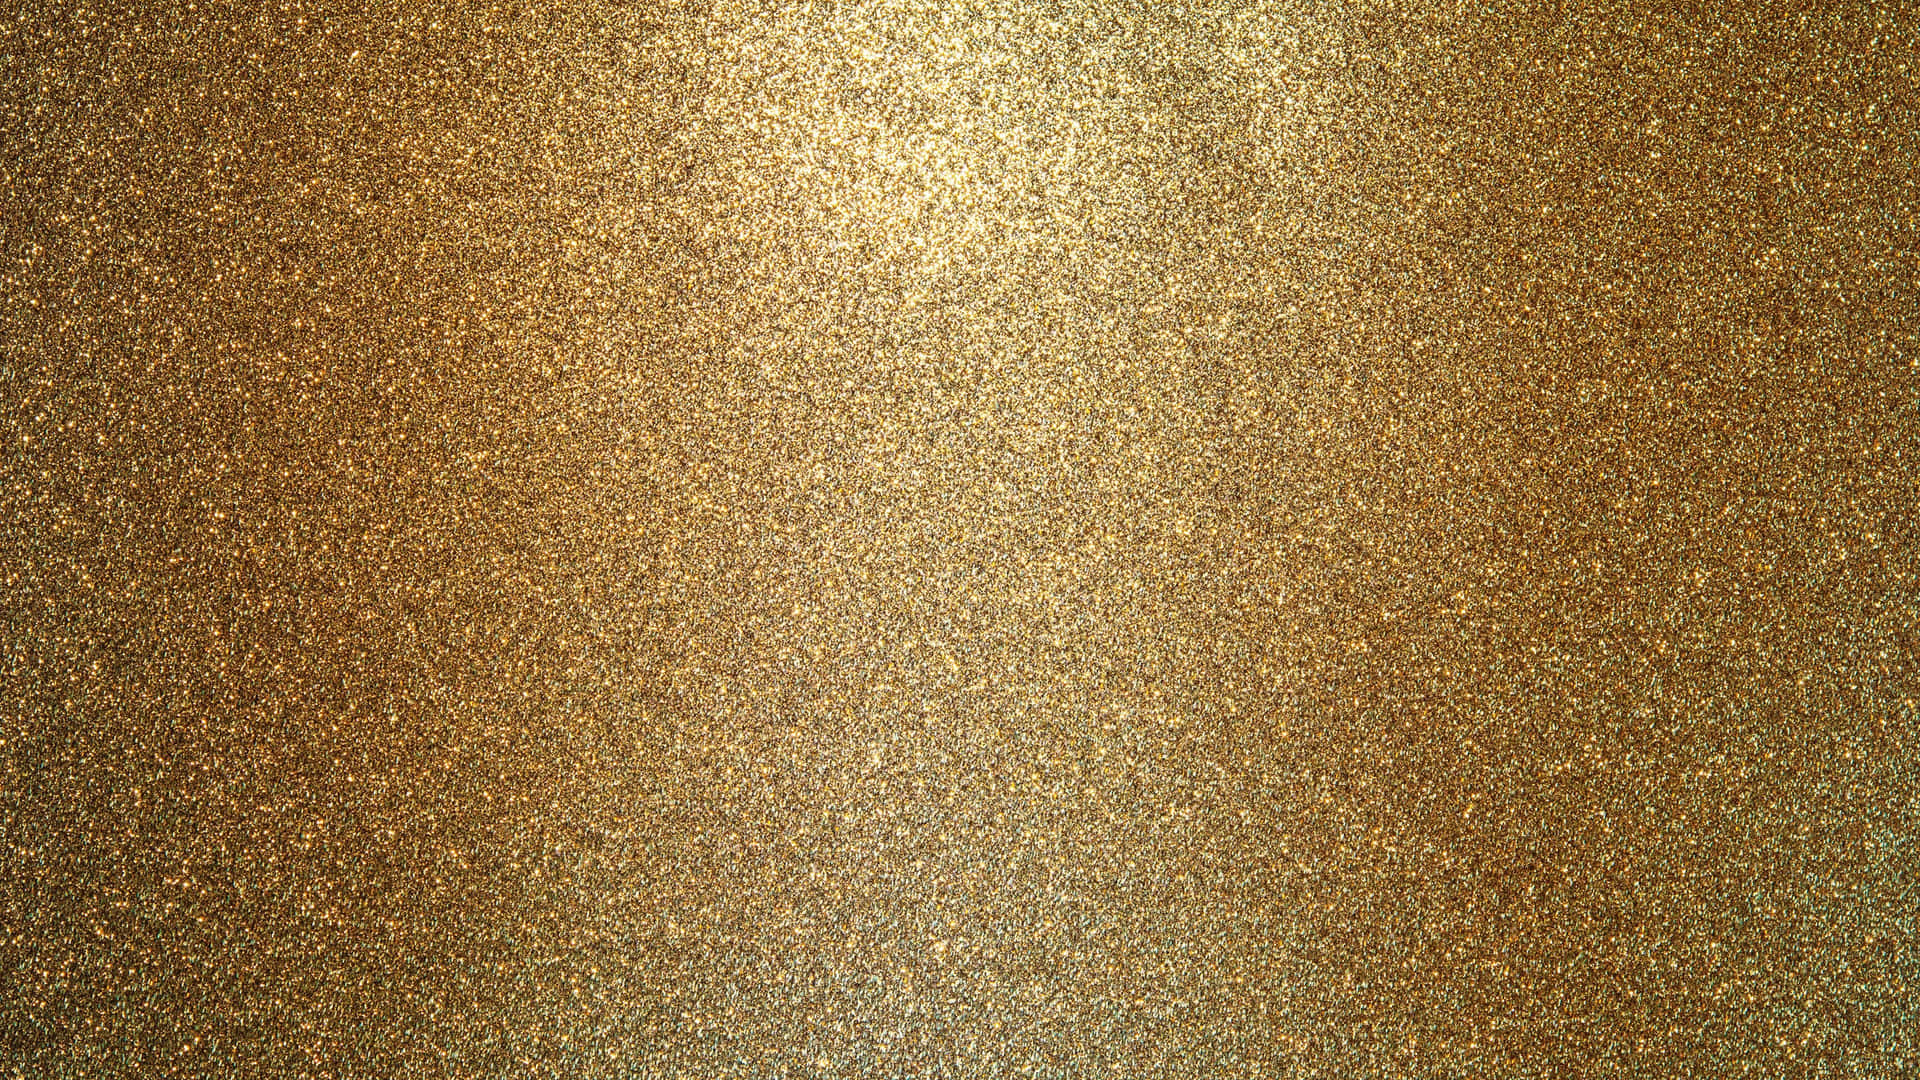 Gold Glitter Micro Particles Picture